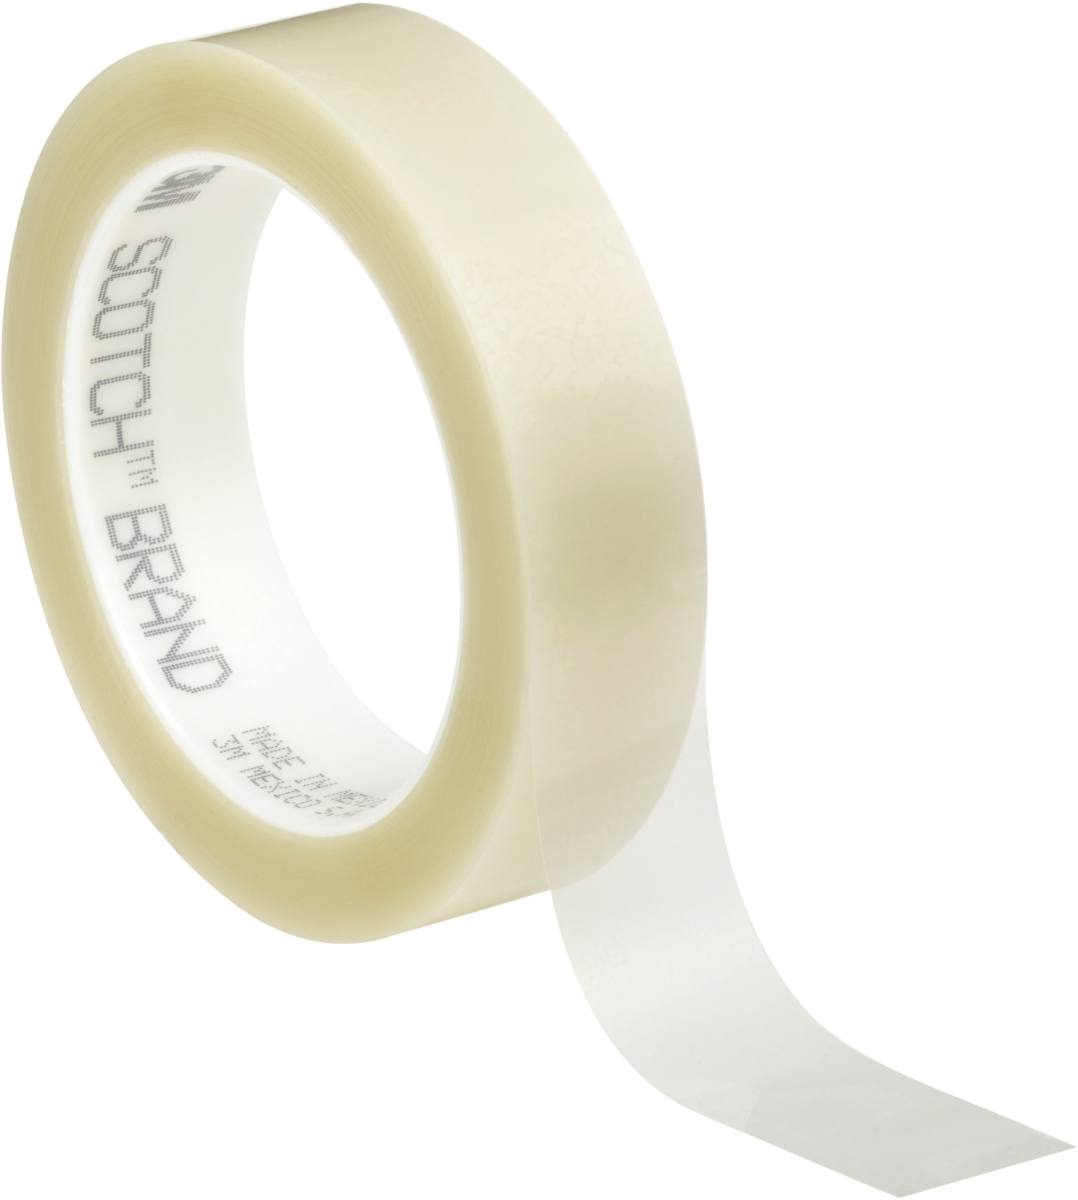 3M polyester adhesive tape 850 T, transparent, 101 mm x 66 m, 0.05 mm